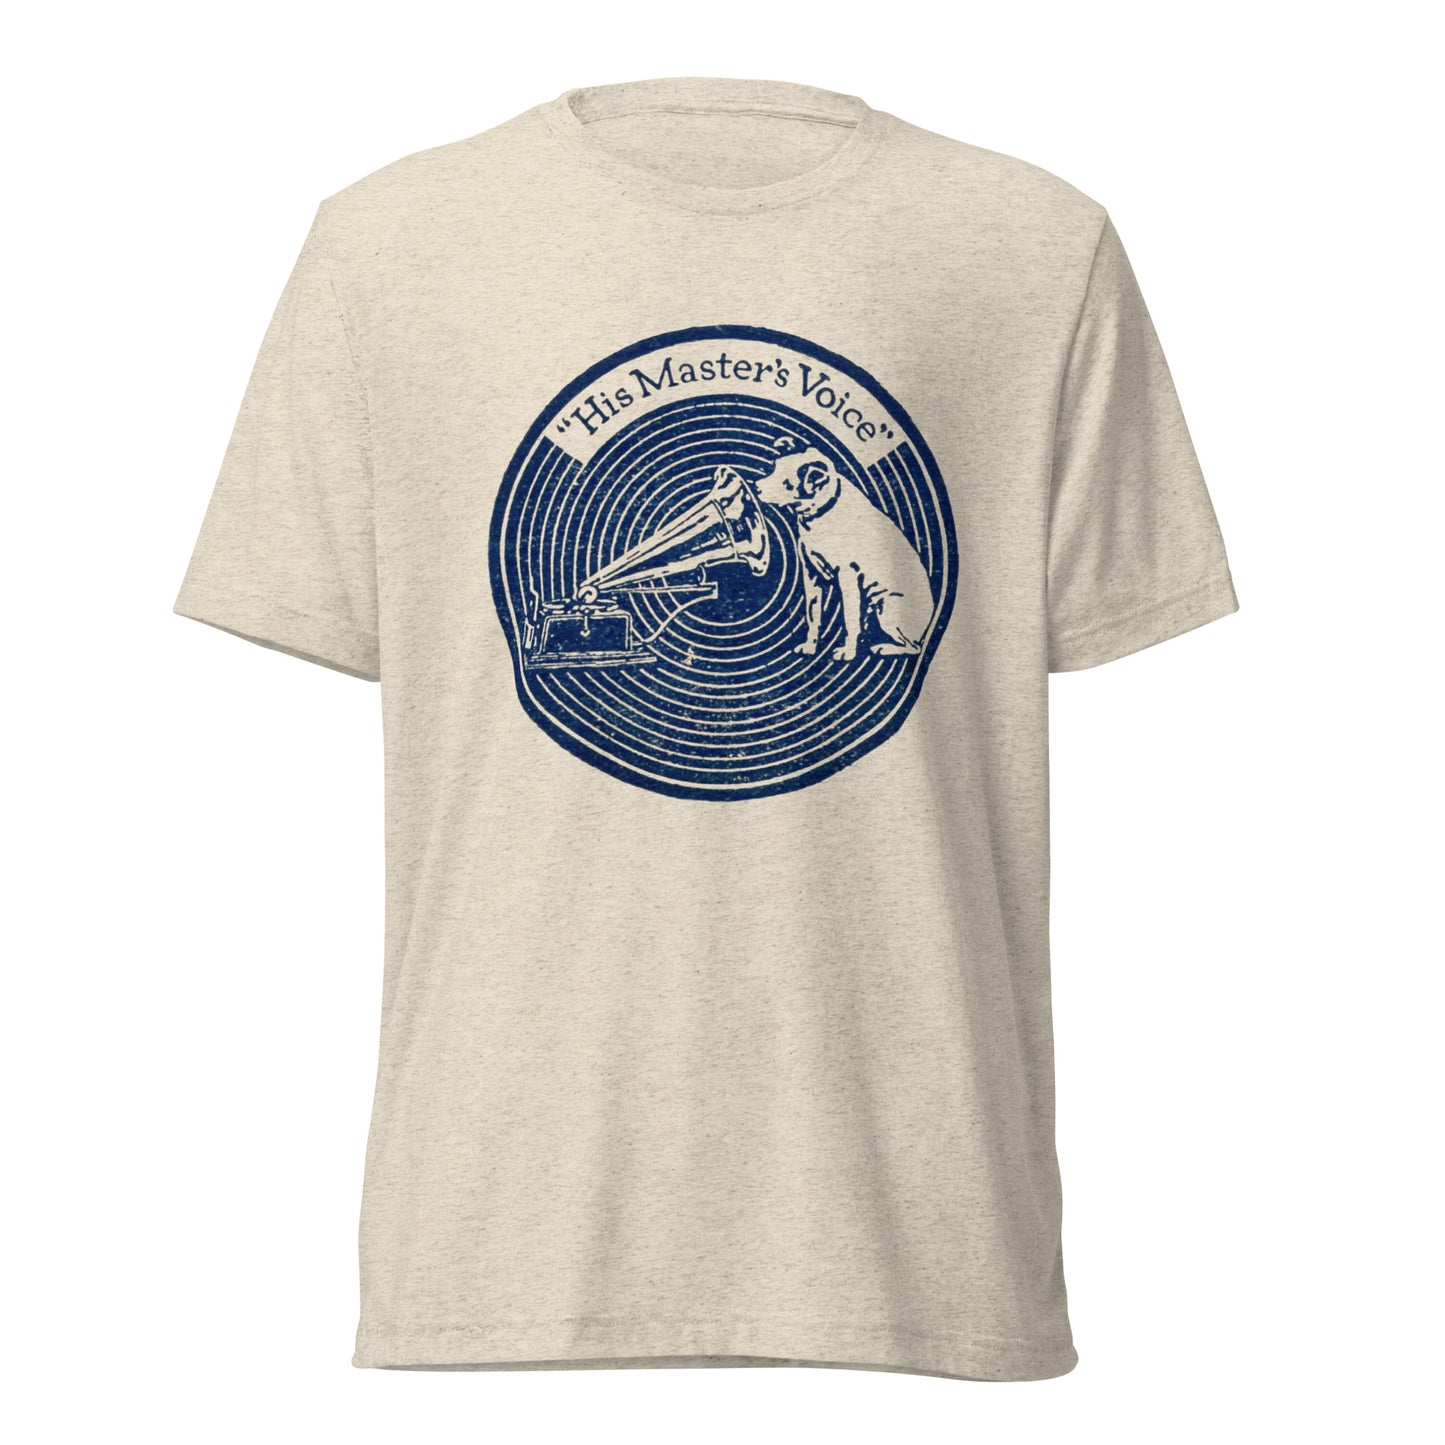 His Masters Voice Short sleeve t-shirt